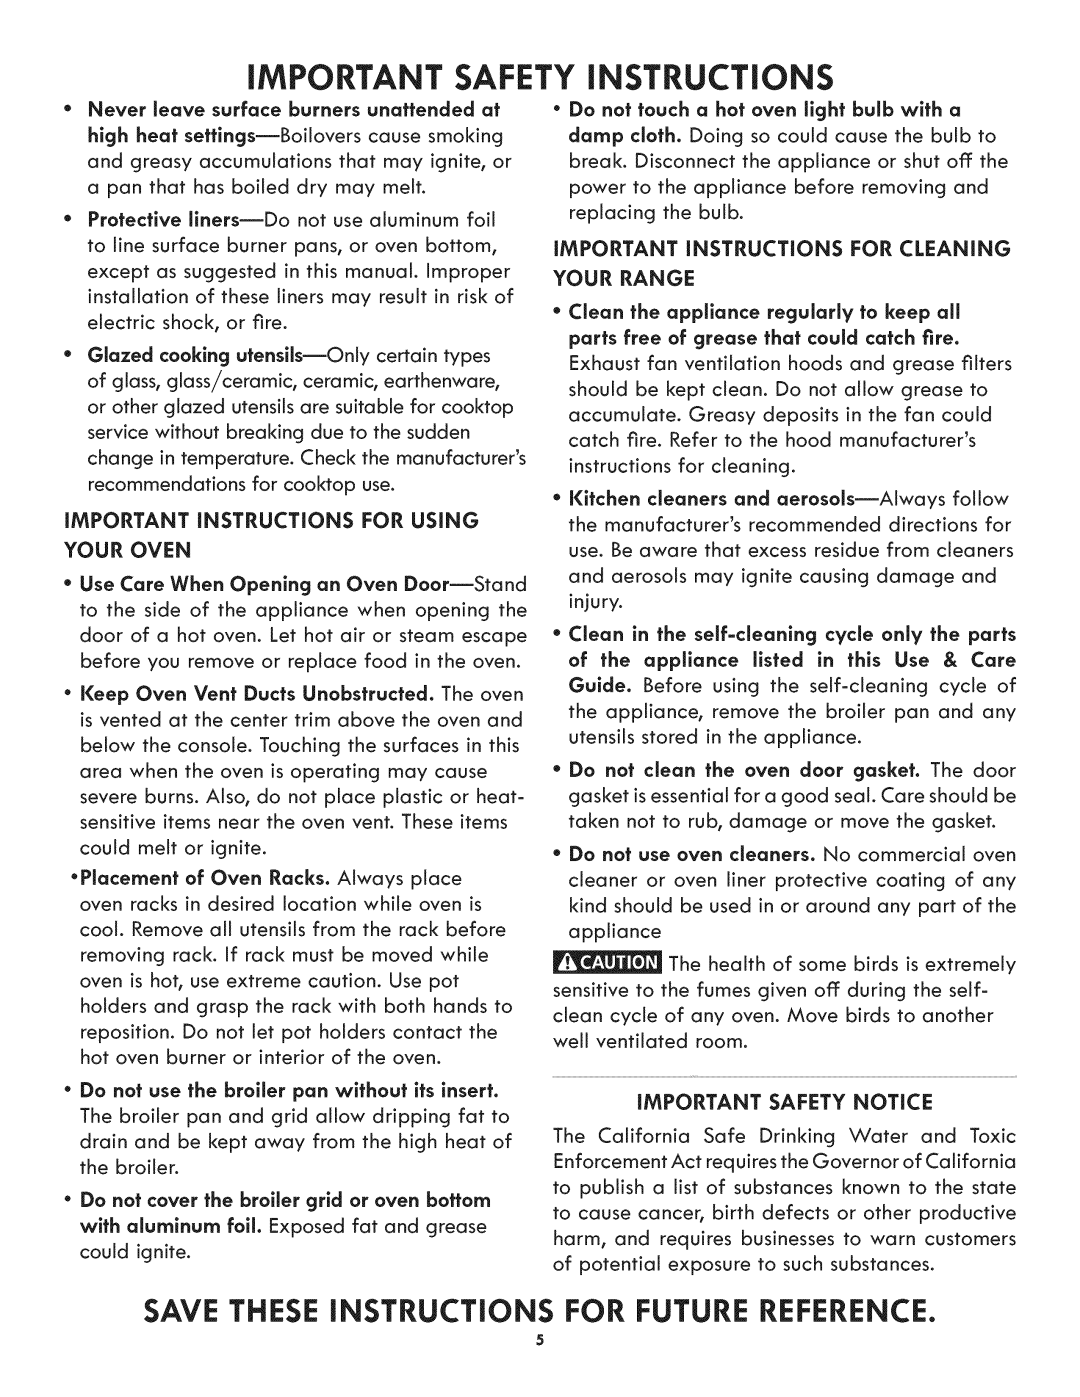 Kenmore 790.3105 manual iMPORTANT SAFETY iNSTRUCTiONS, Save These Instructions For Future Reference 